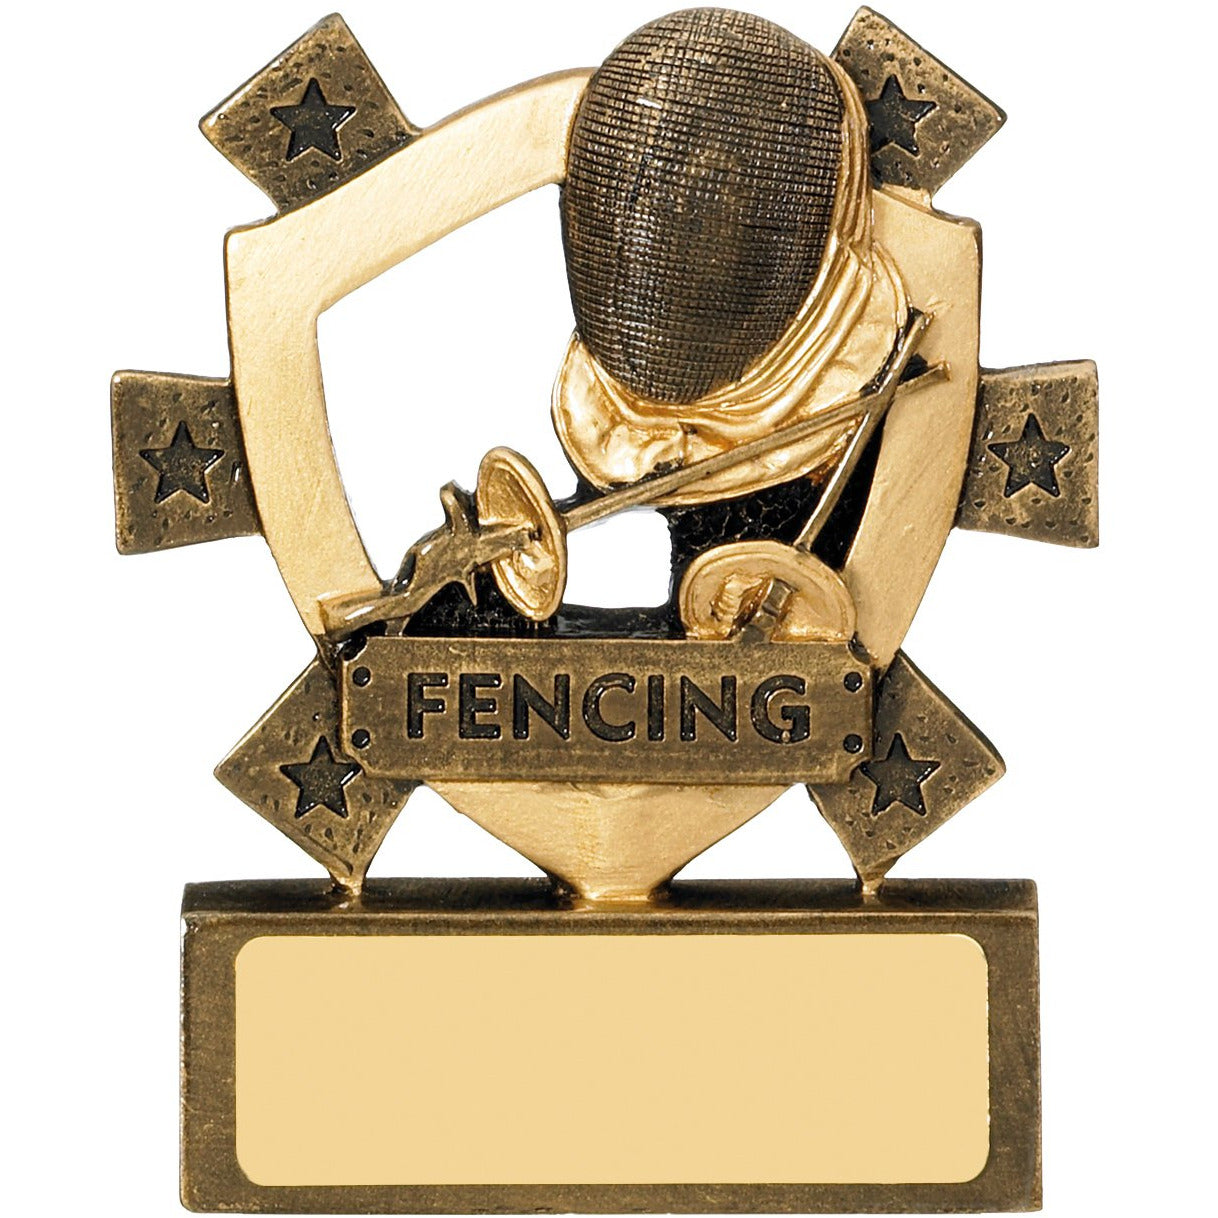 Fencing Mini Shield Trophy 8cm (CLEARANCE)